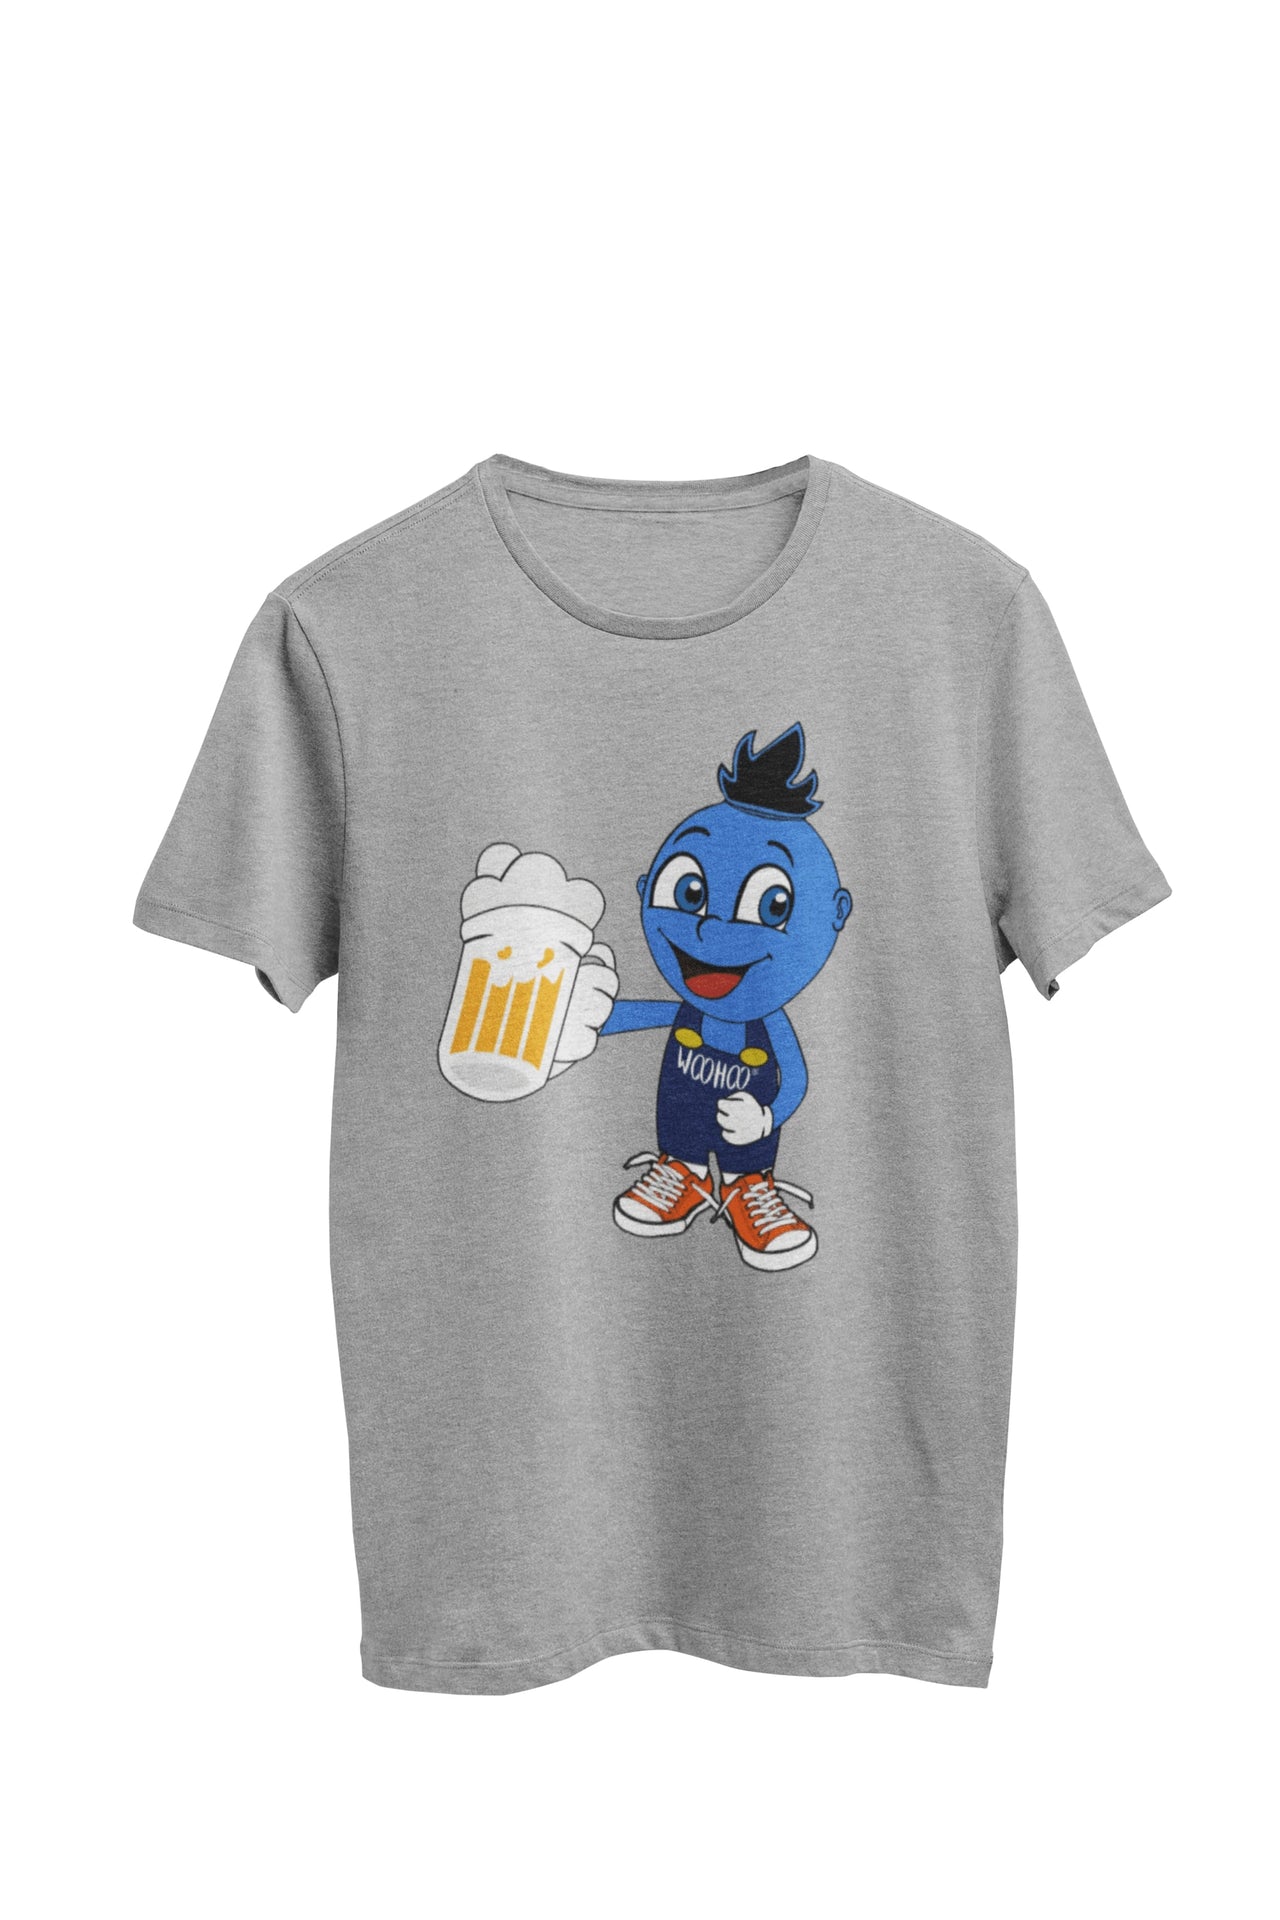 WooHooBerry celebrating enthusiastically with a beer in hand, adorned in blue overalls that prominently feature the text 'WooHoo.' The gray T-shirt adds to the lively and festive ambiance of the moment